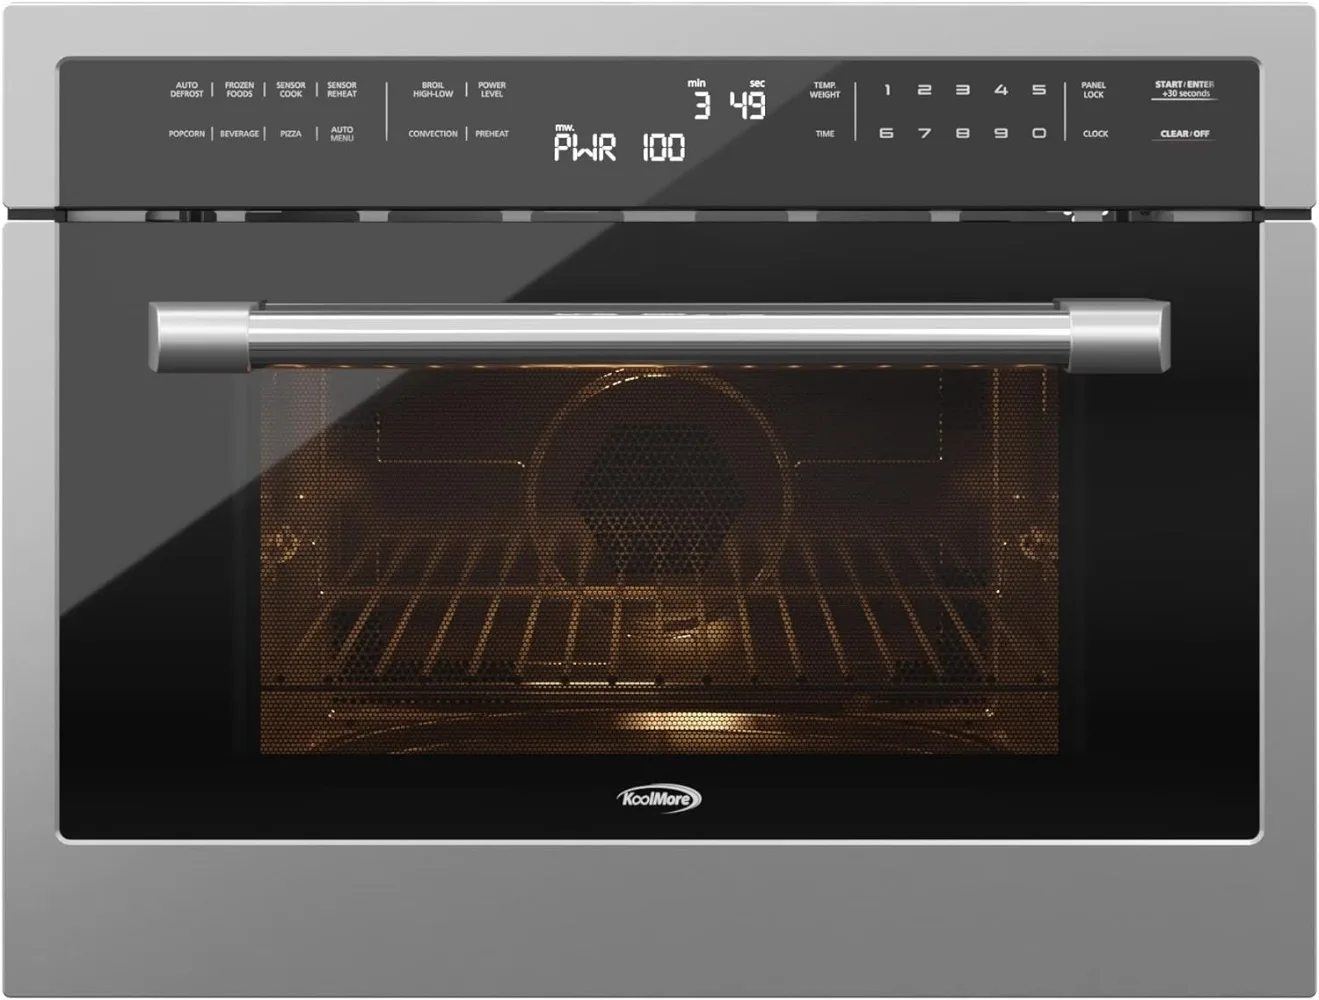 

KoolMore 24 Inch Built-in Convection Oven and Microwave Combination with Broil, Soft Close Door, 1000 Watt Power